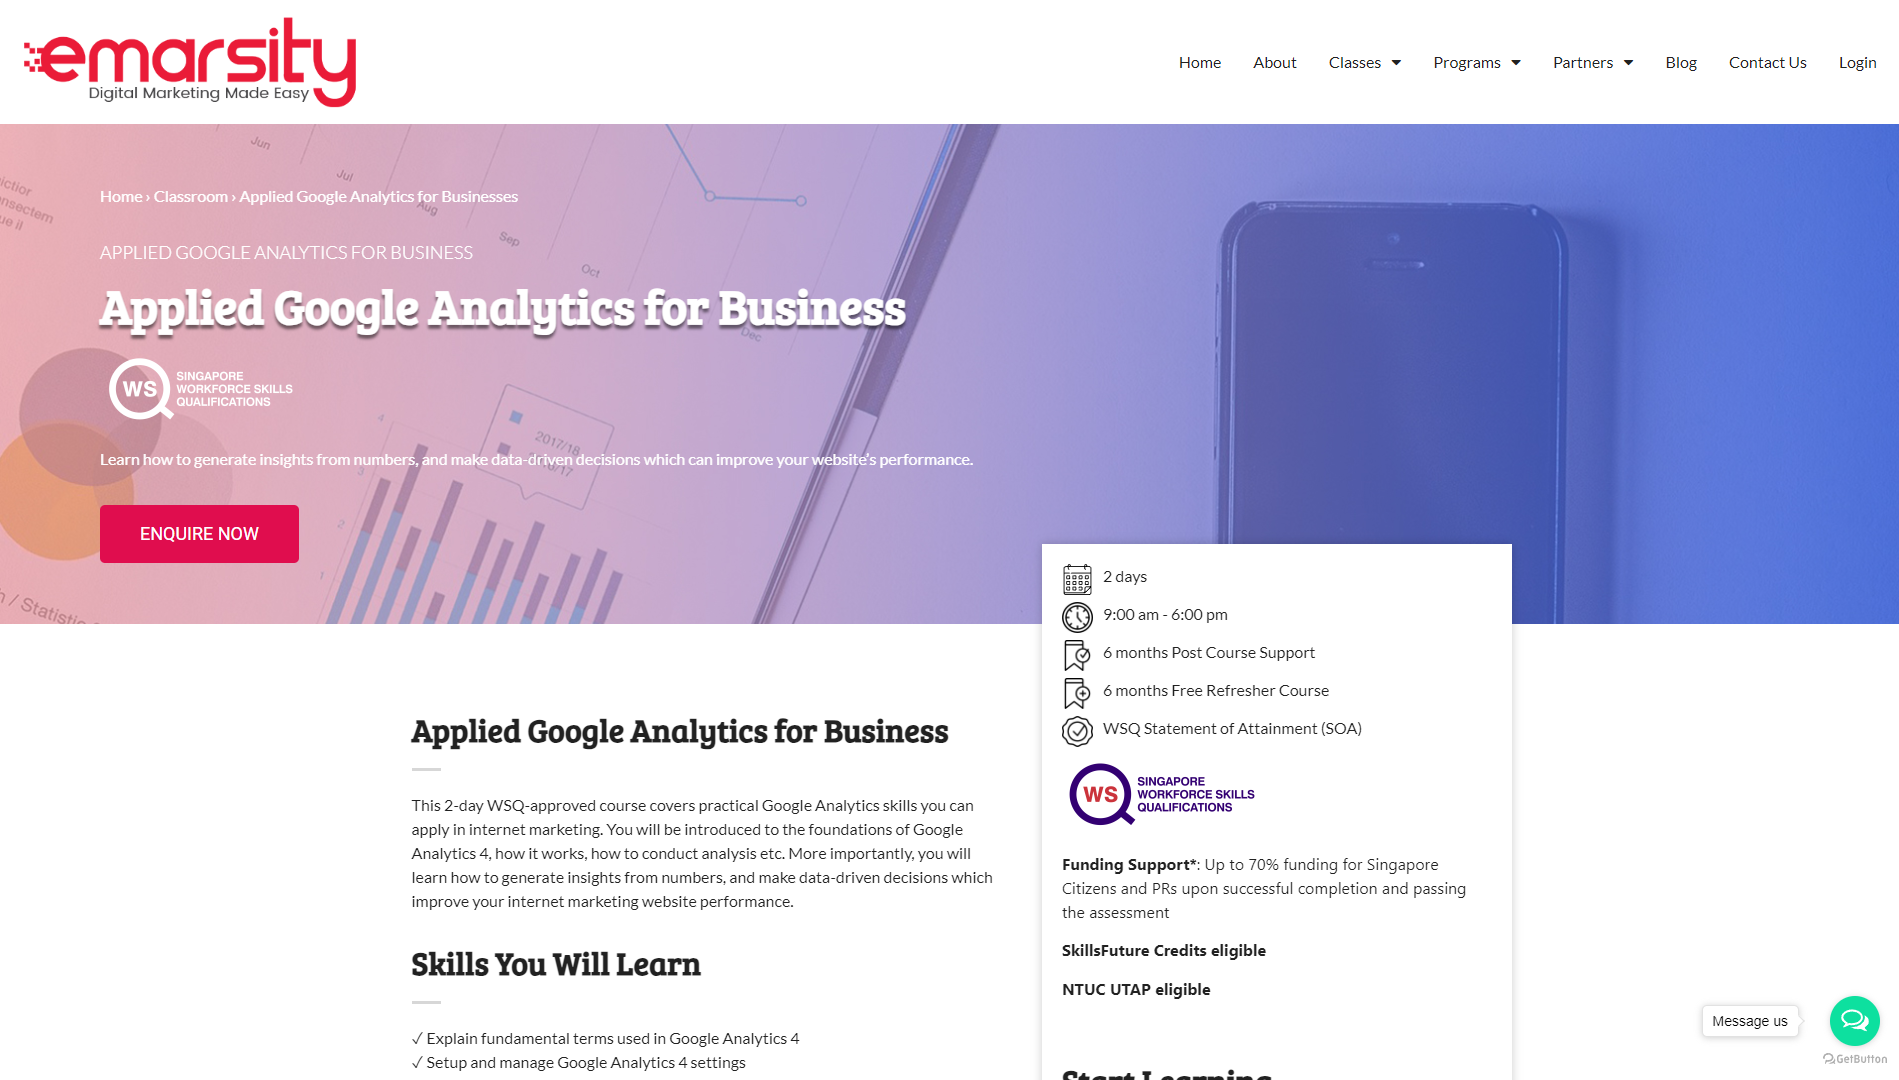 emarsity applied google analytics certification course in singapore